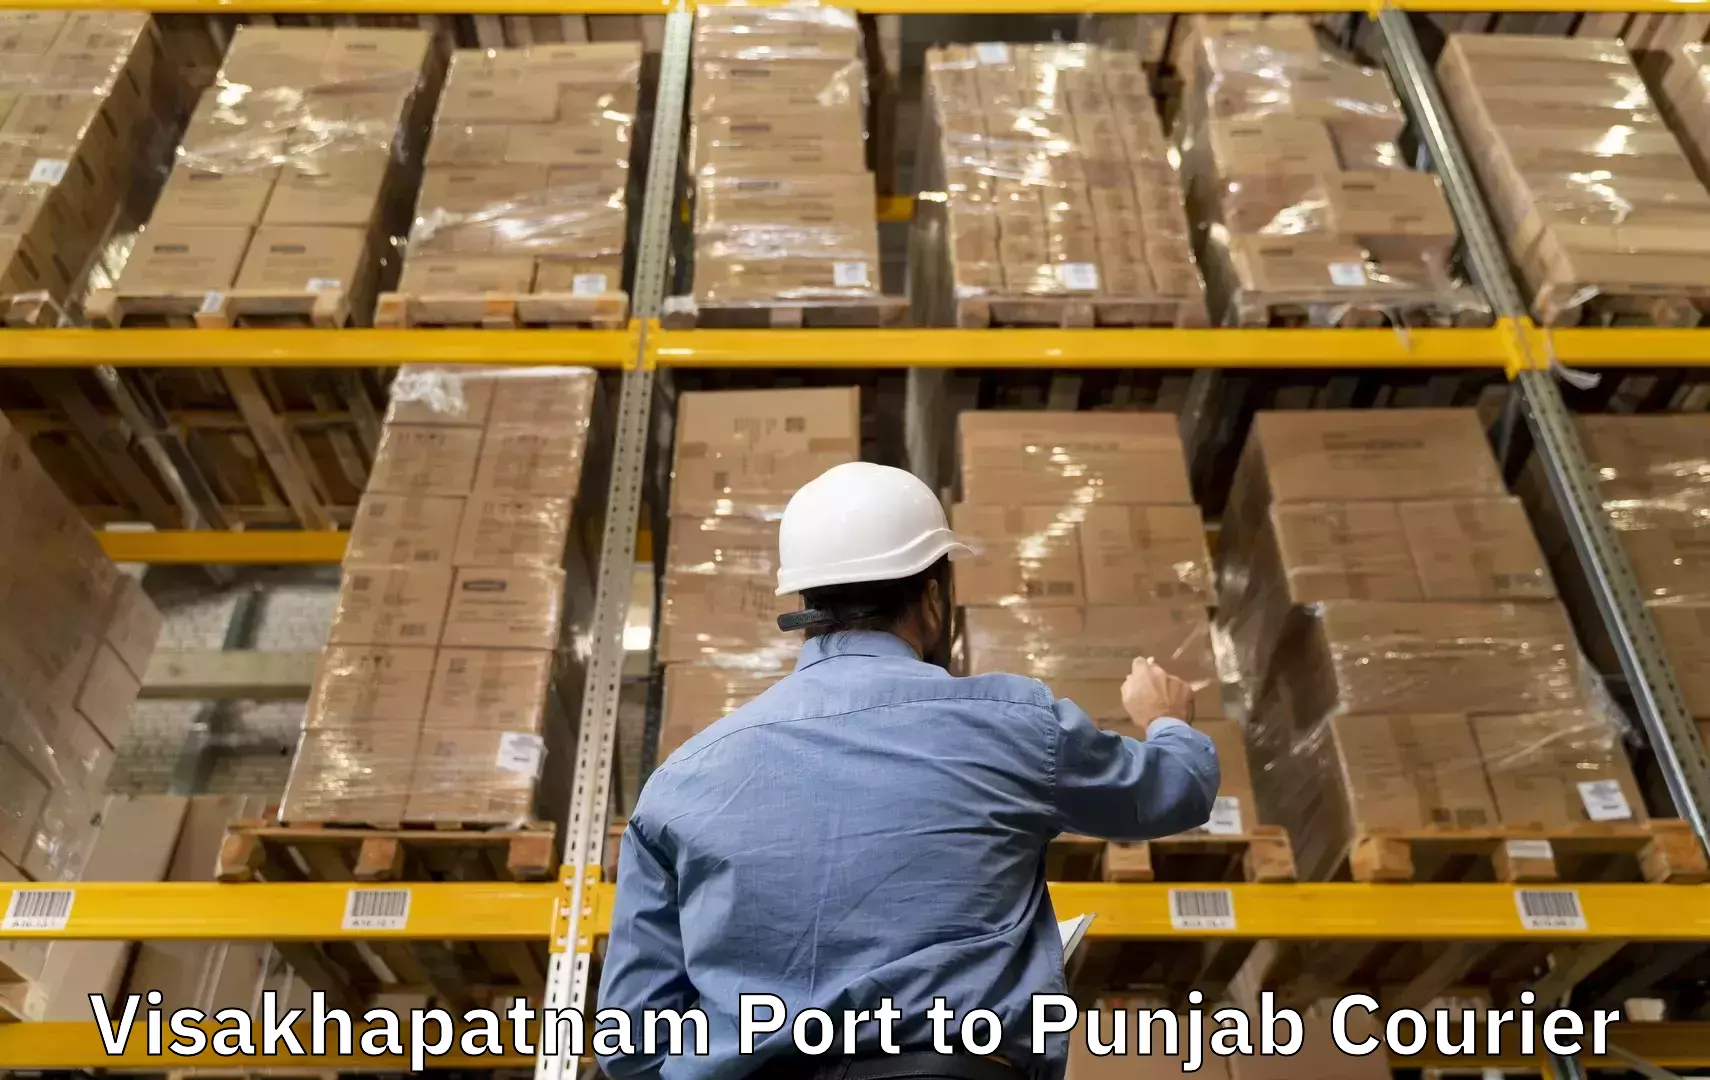 Luggage delivery providers Visakhapatnam Port to Raikot